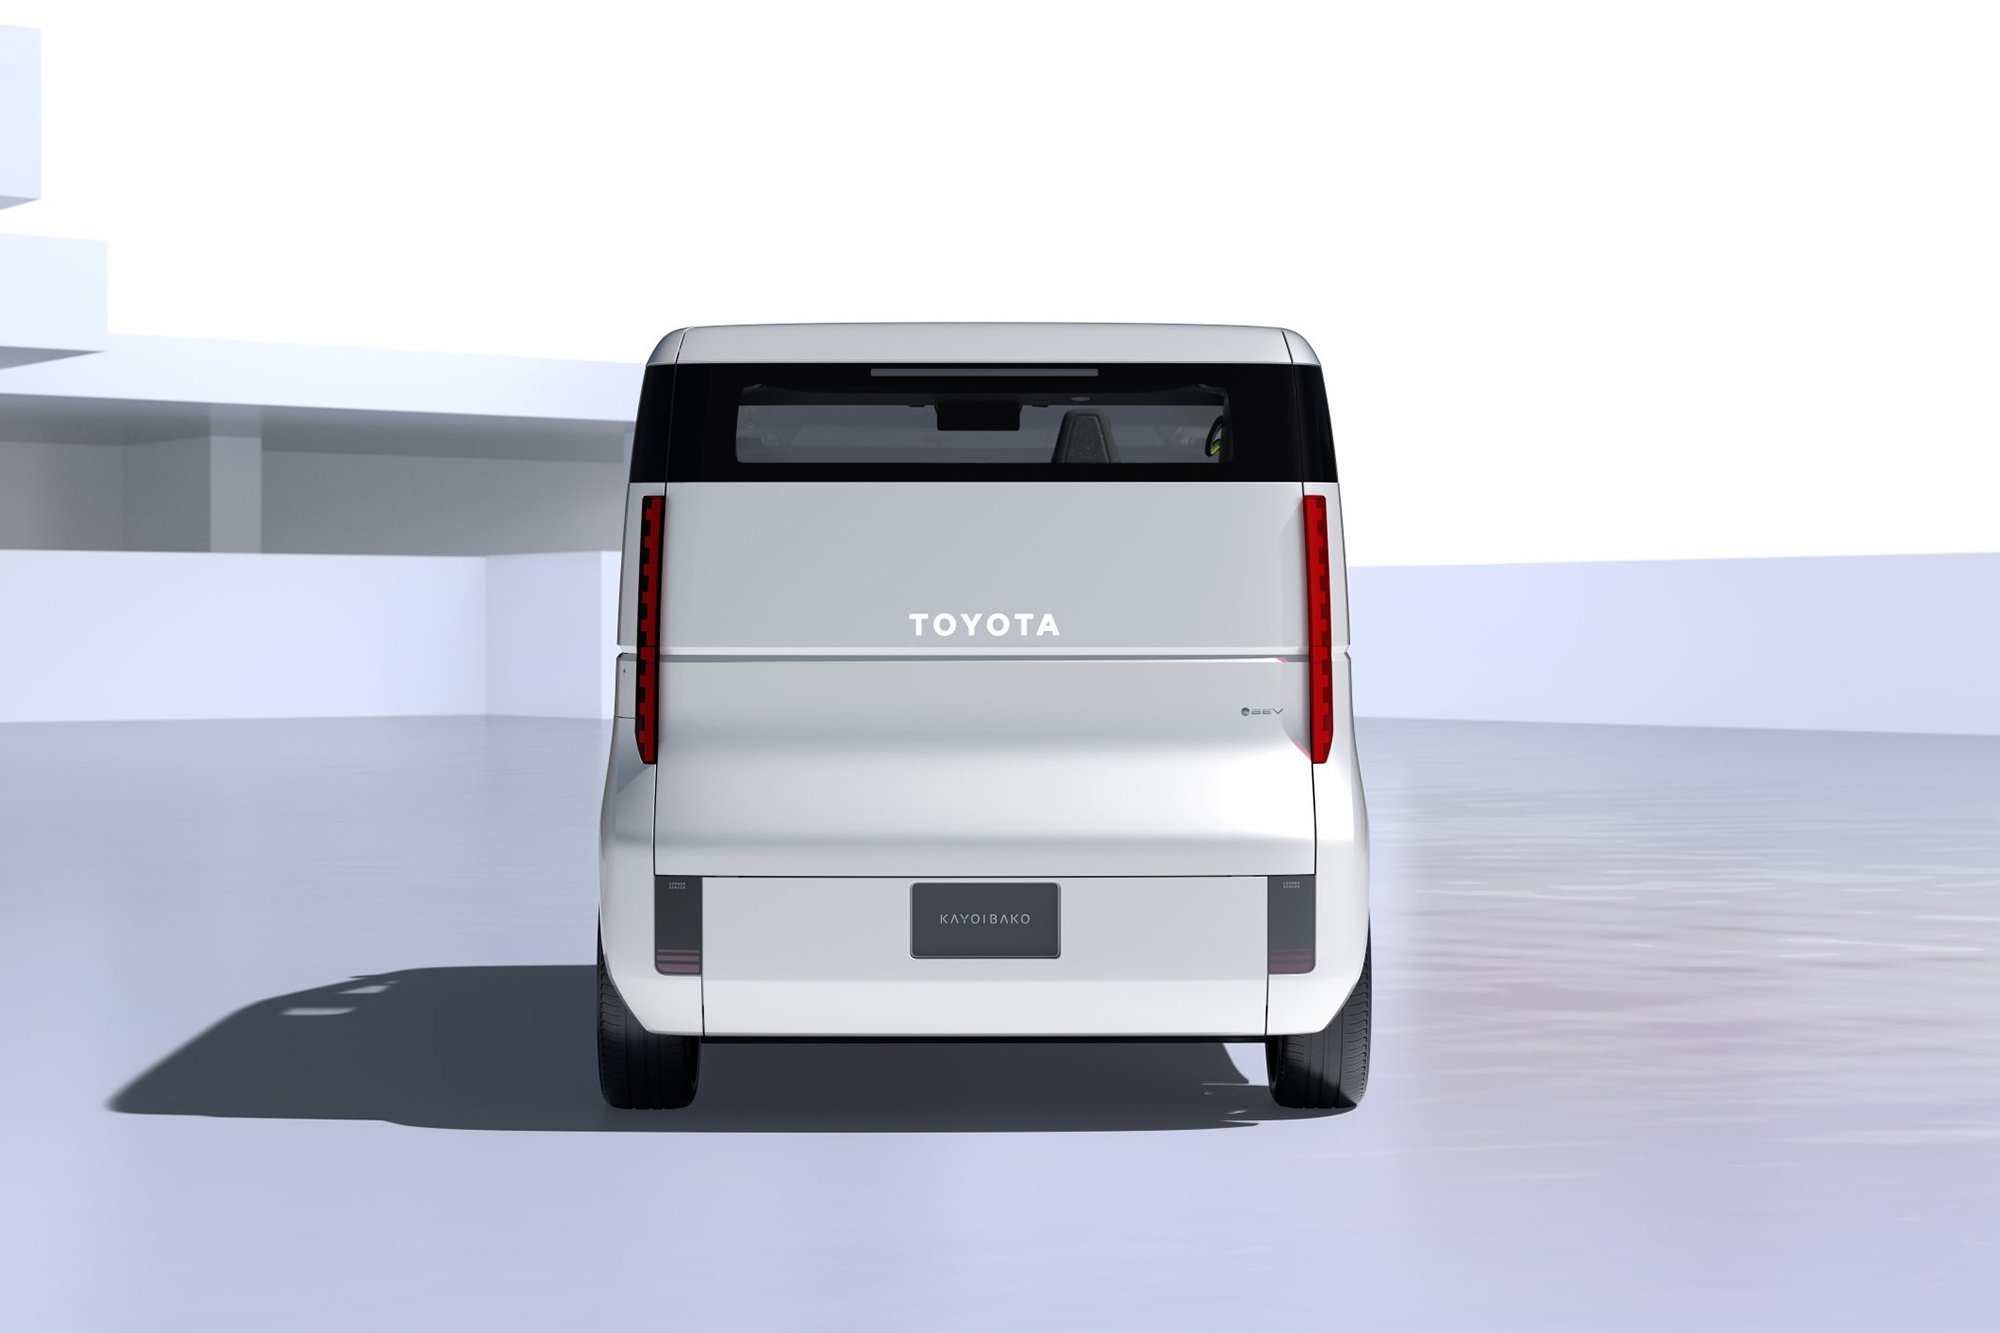 Rear design of Toyota Kayoibako – the inspiring concept of a customisable battery electric vehicle